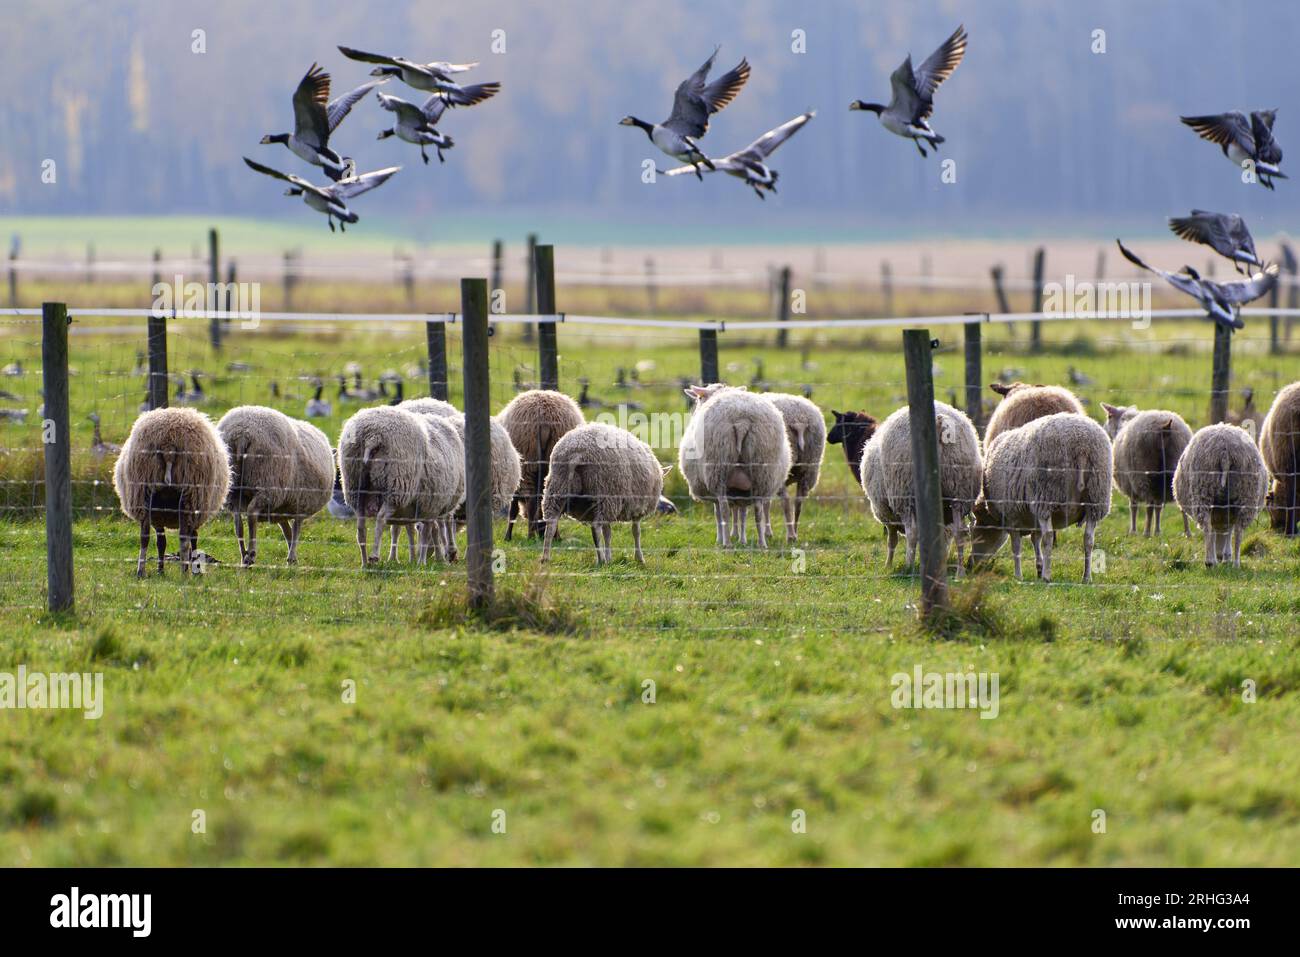 Sheeps eating in a fenced pasture and large flock of barnacle goose flying and on the ground behind a fence with Autumn foliage on the background Octo Stock Photo